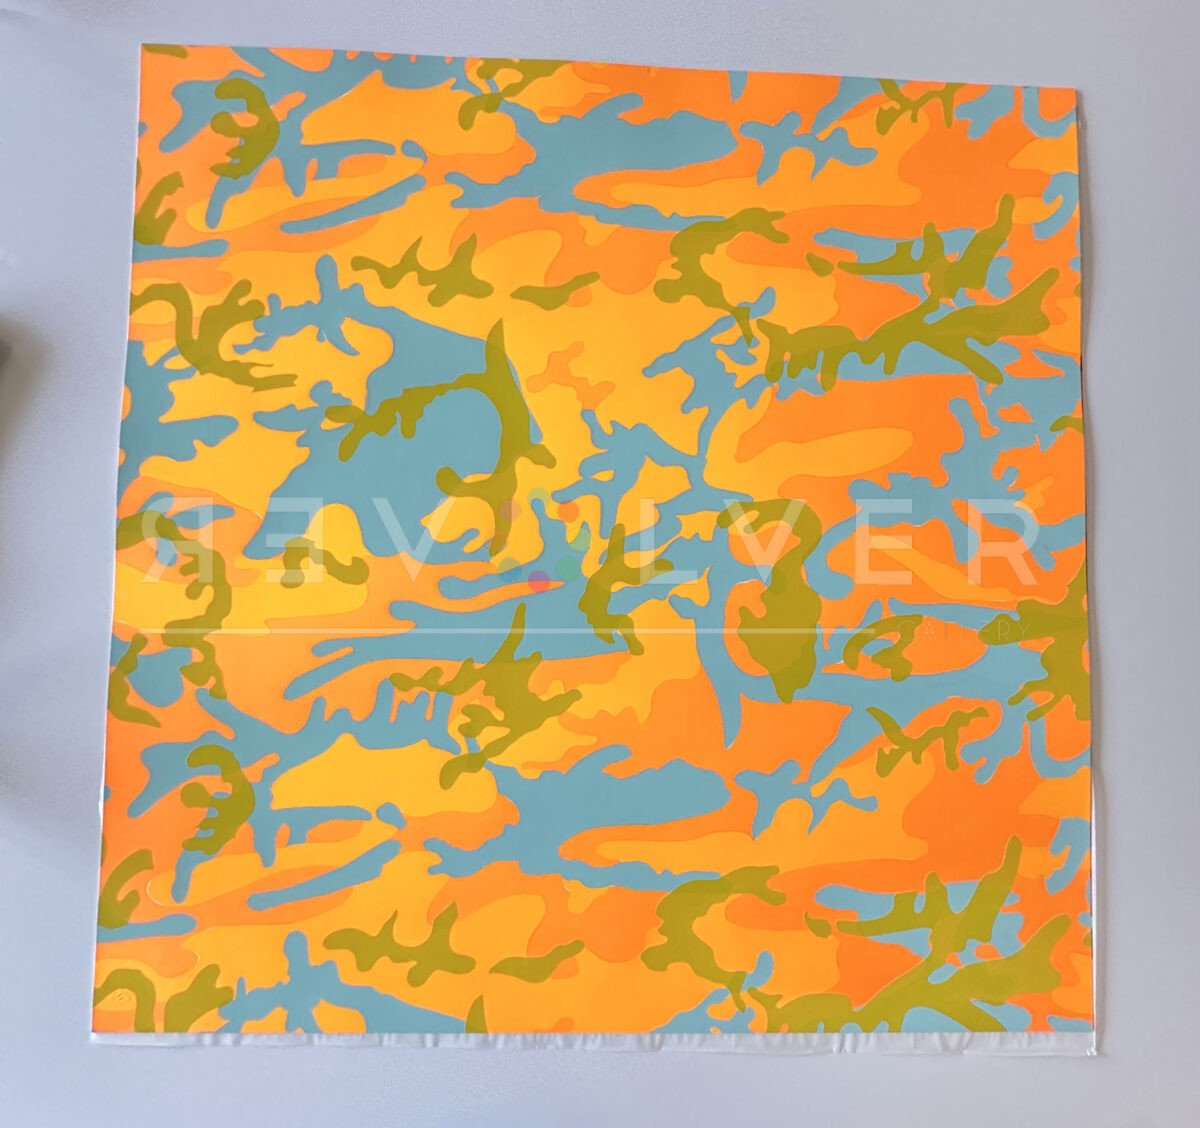 Camouflage 413 by Andy Warhol outside of a frame